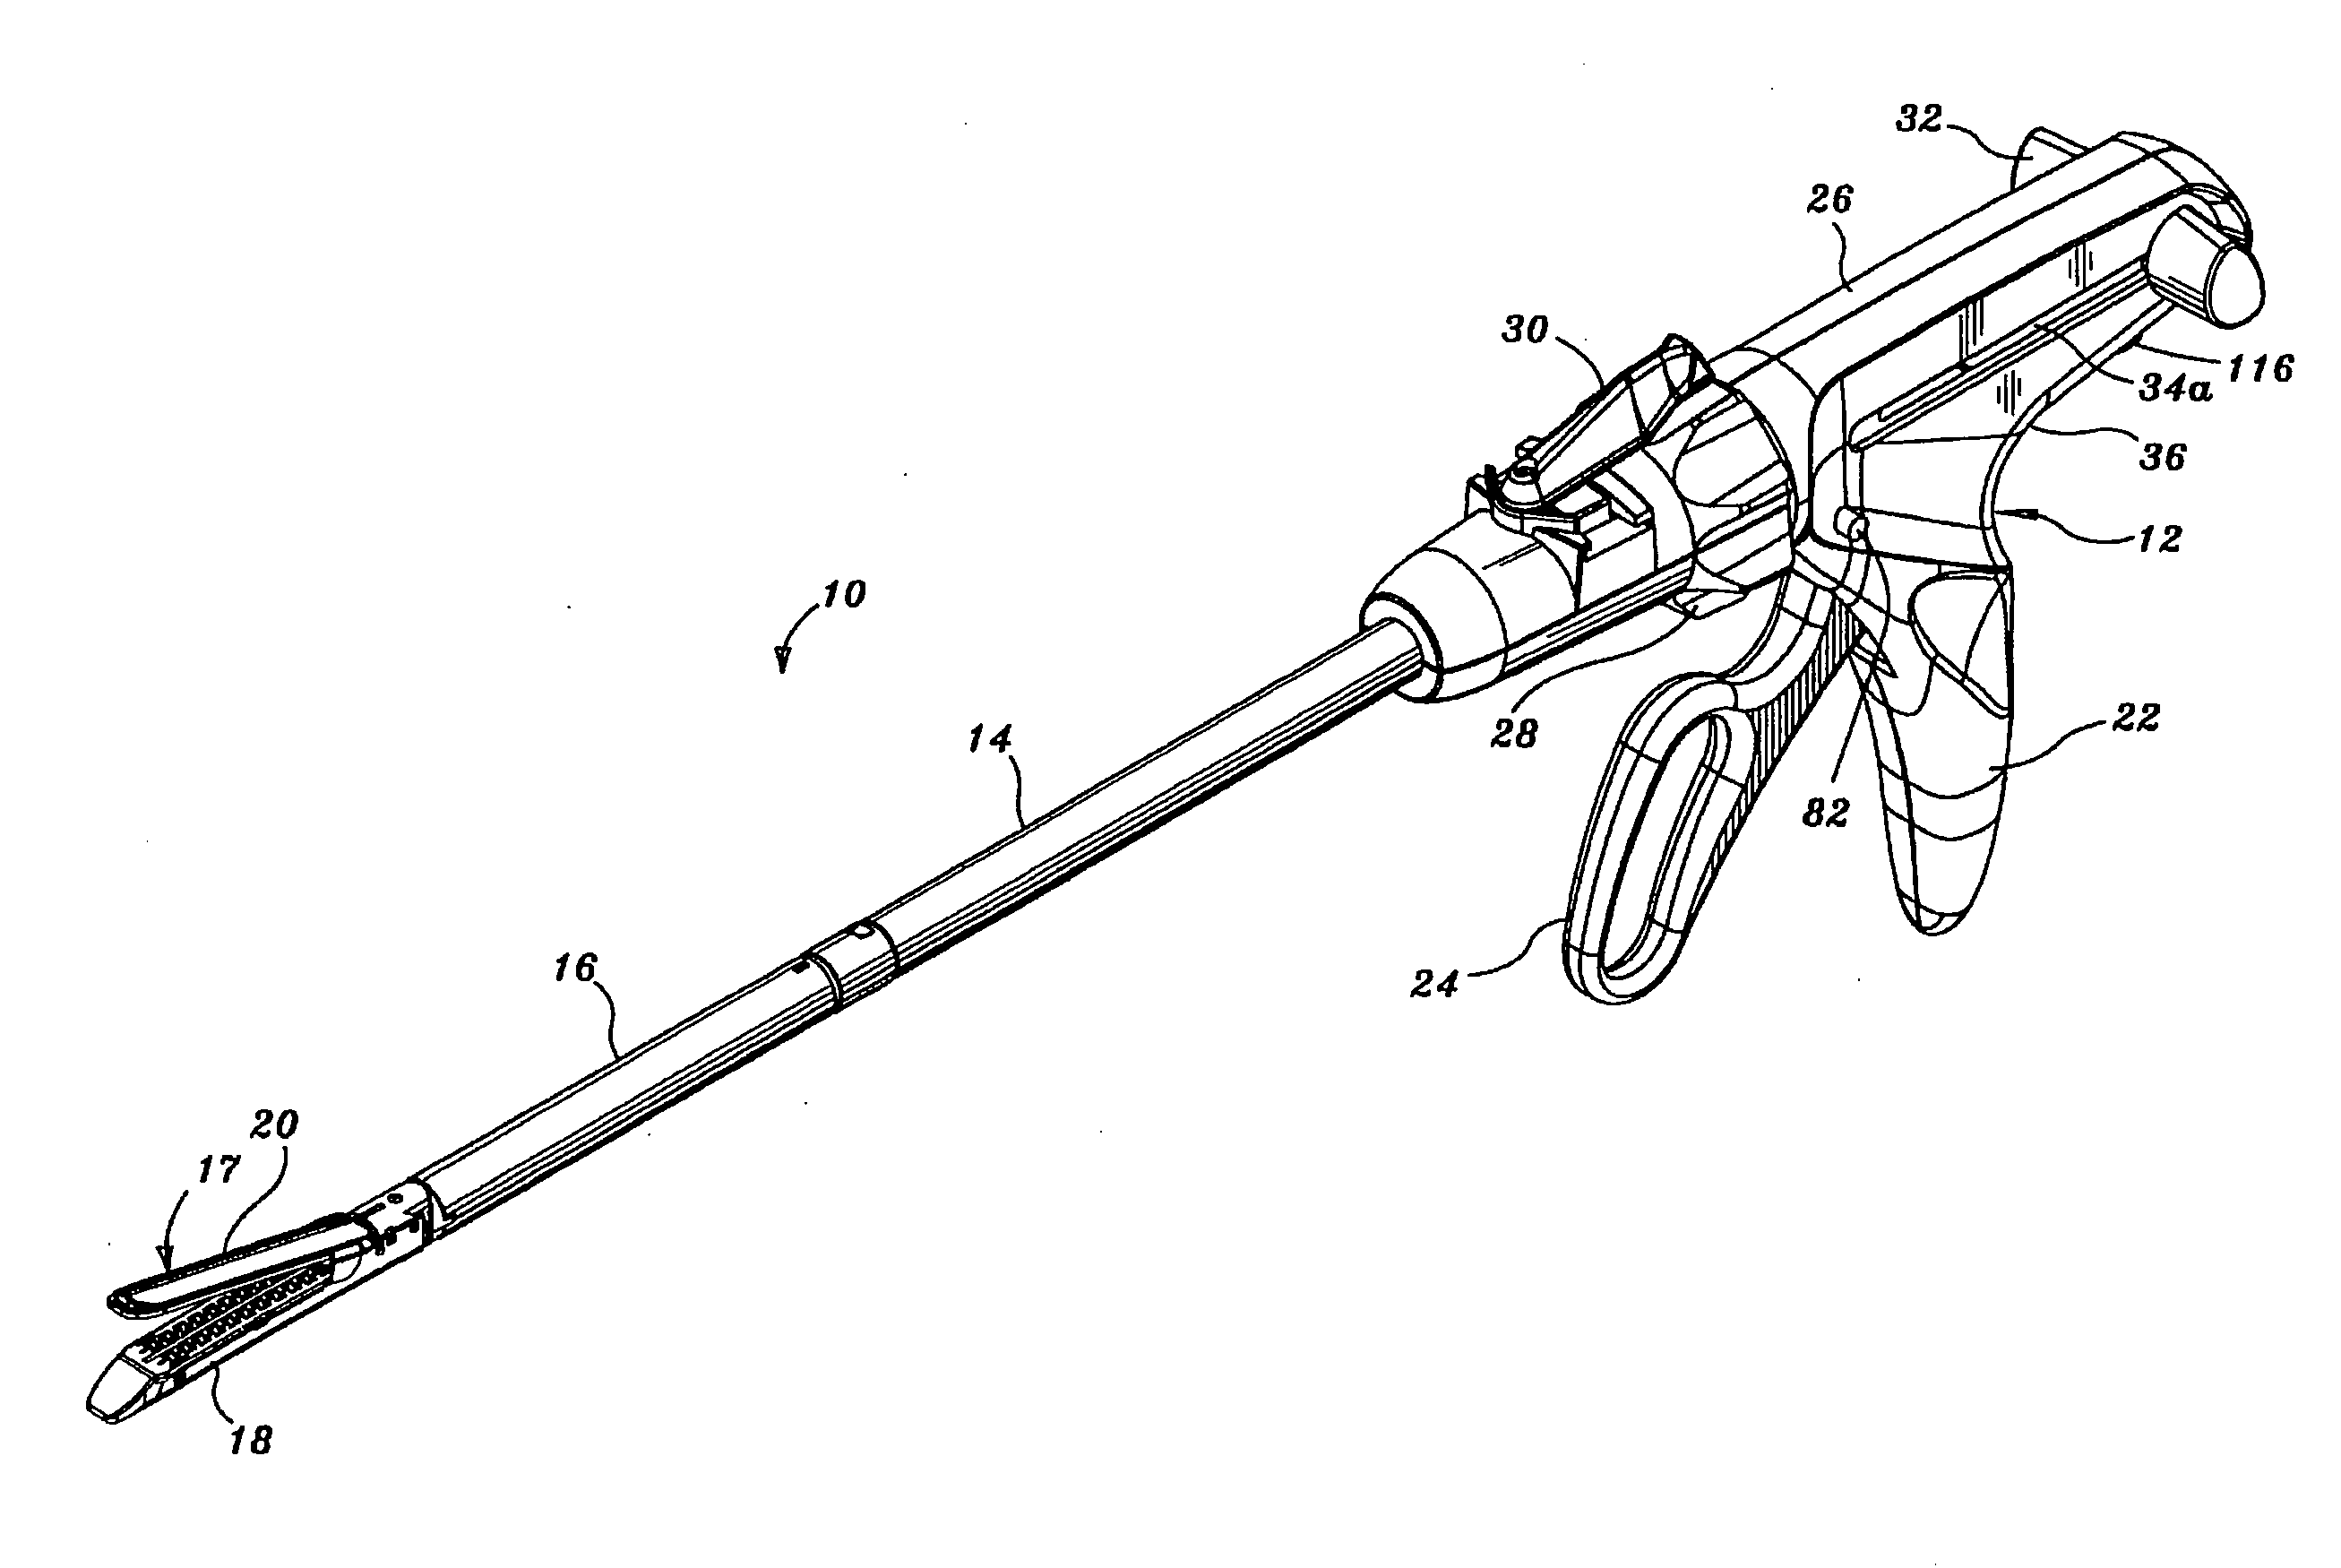 End effectors for a surgical cutting and stapling instrument